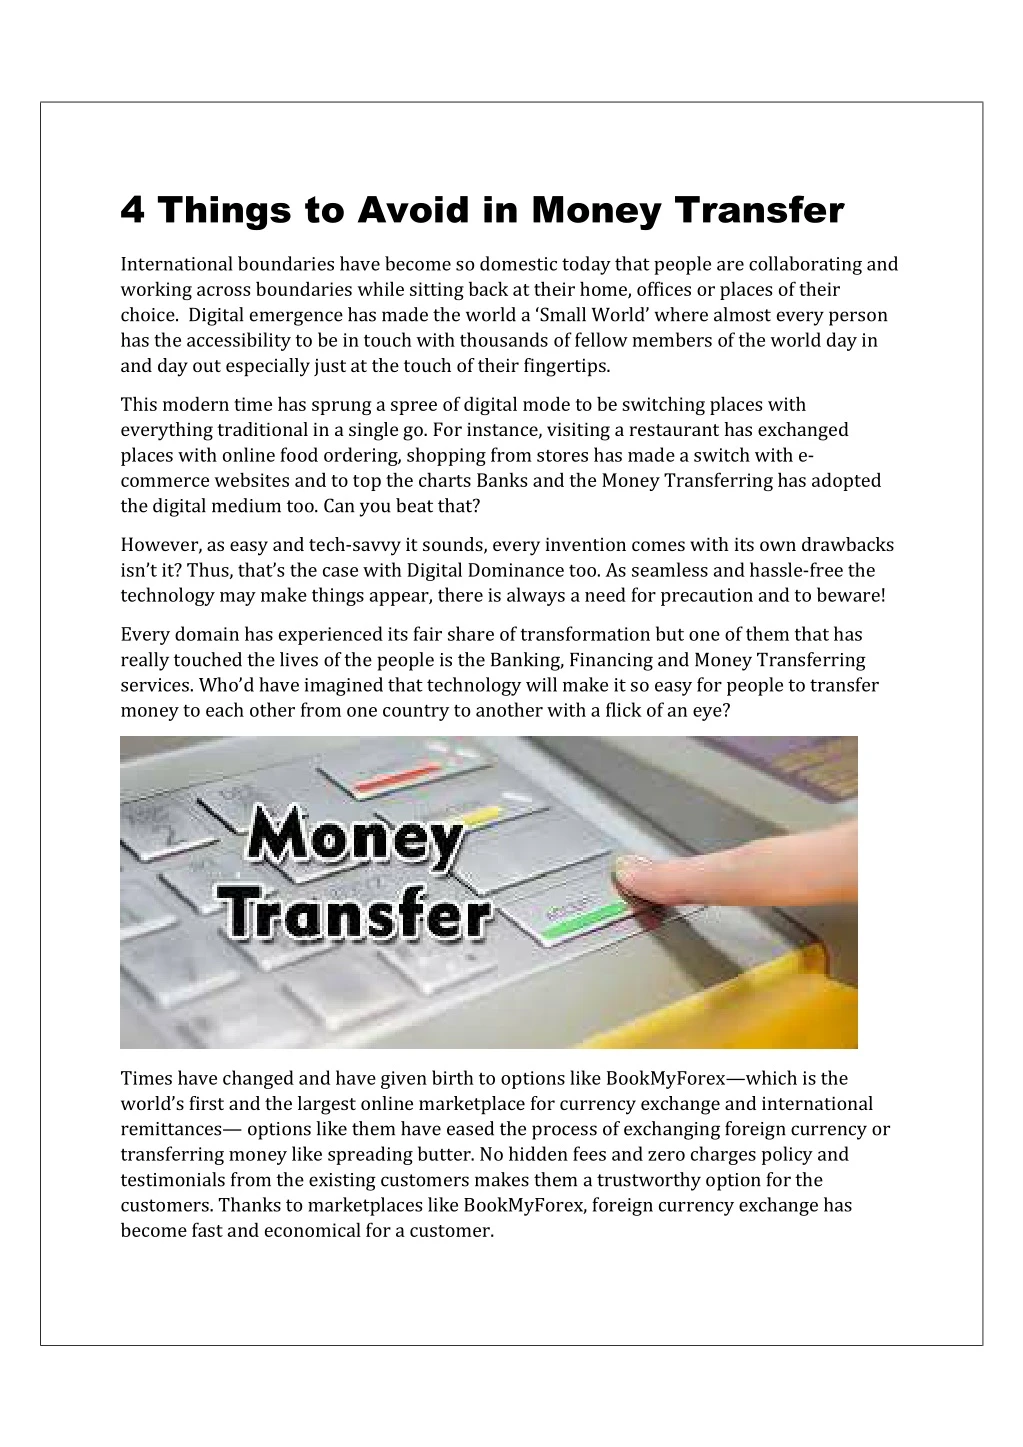 4 things to avoid in money transfer